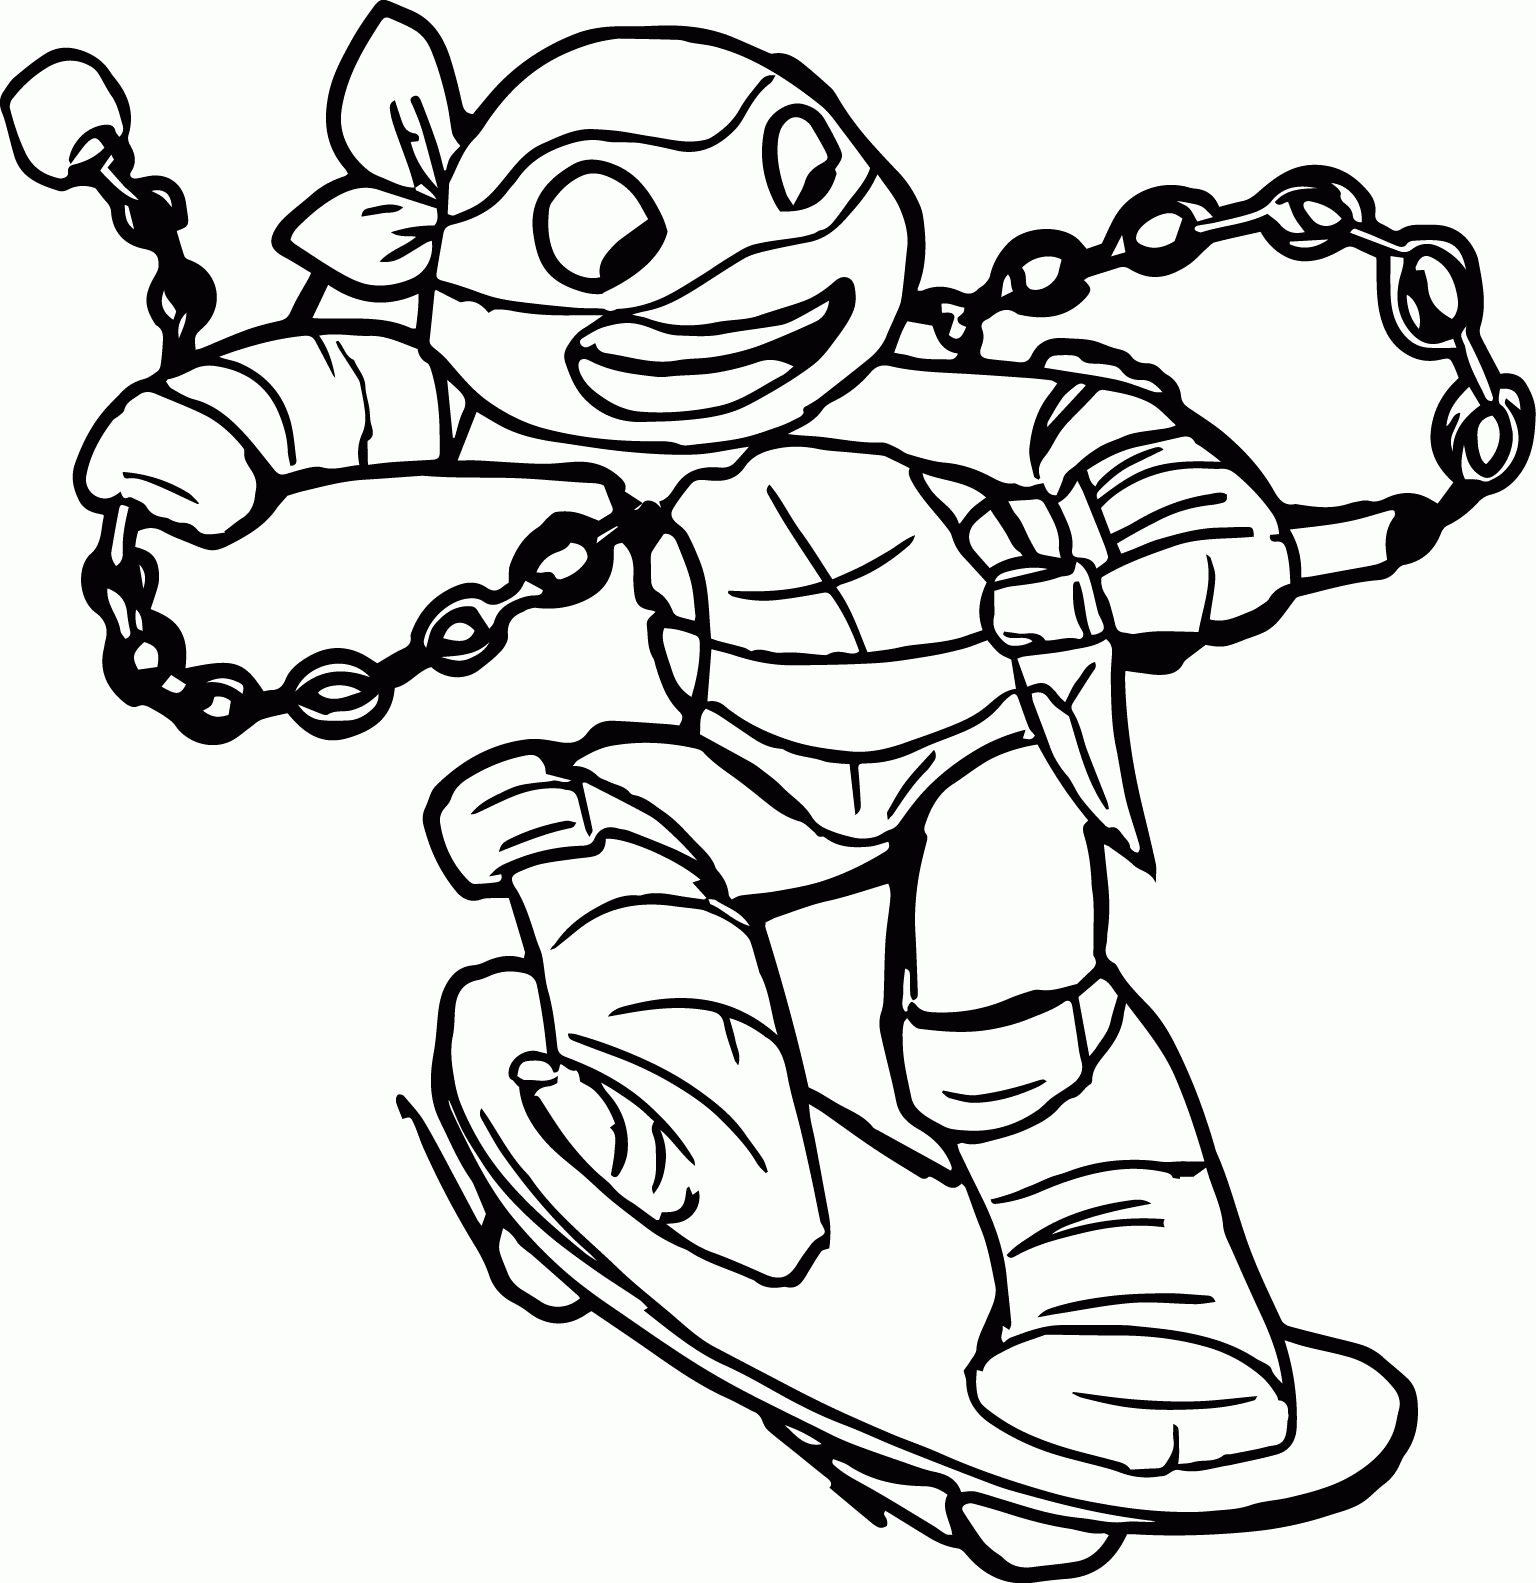 Adult Ninja Turtle Coloring Pages - Coloring Pages For All Ages